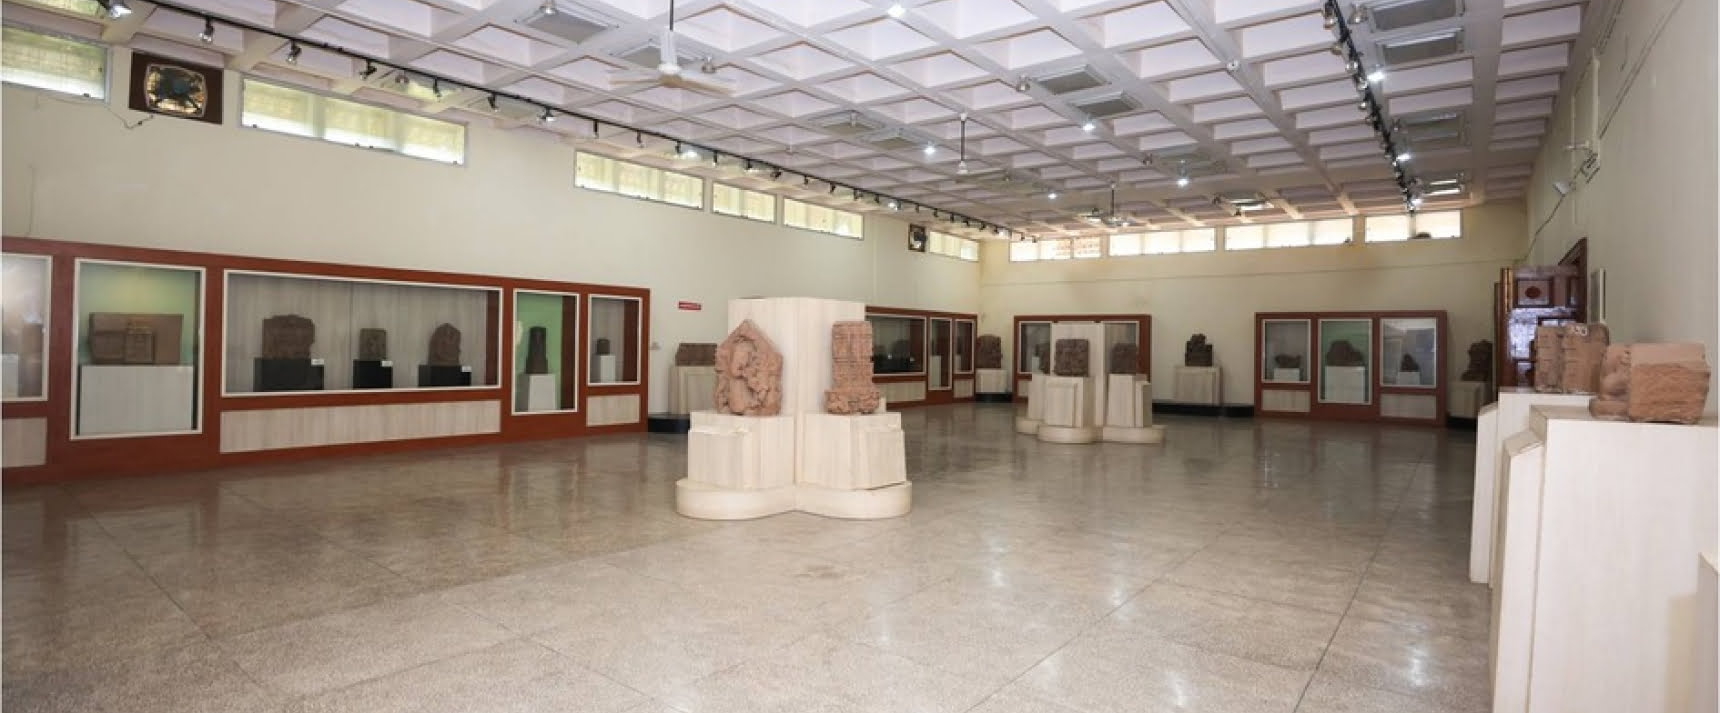 GOVERNMENT MUSEUM IN JHANSI